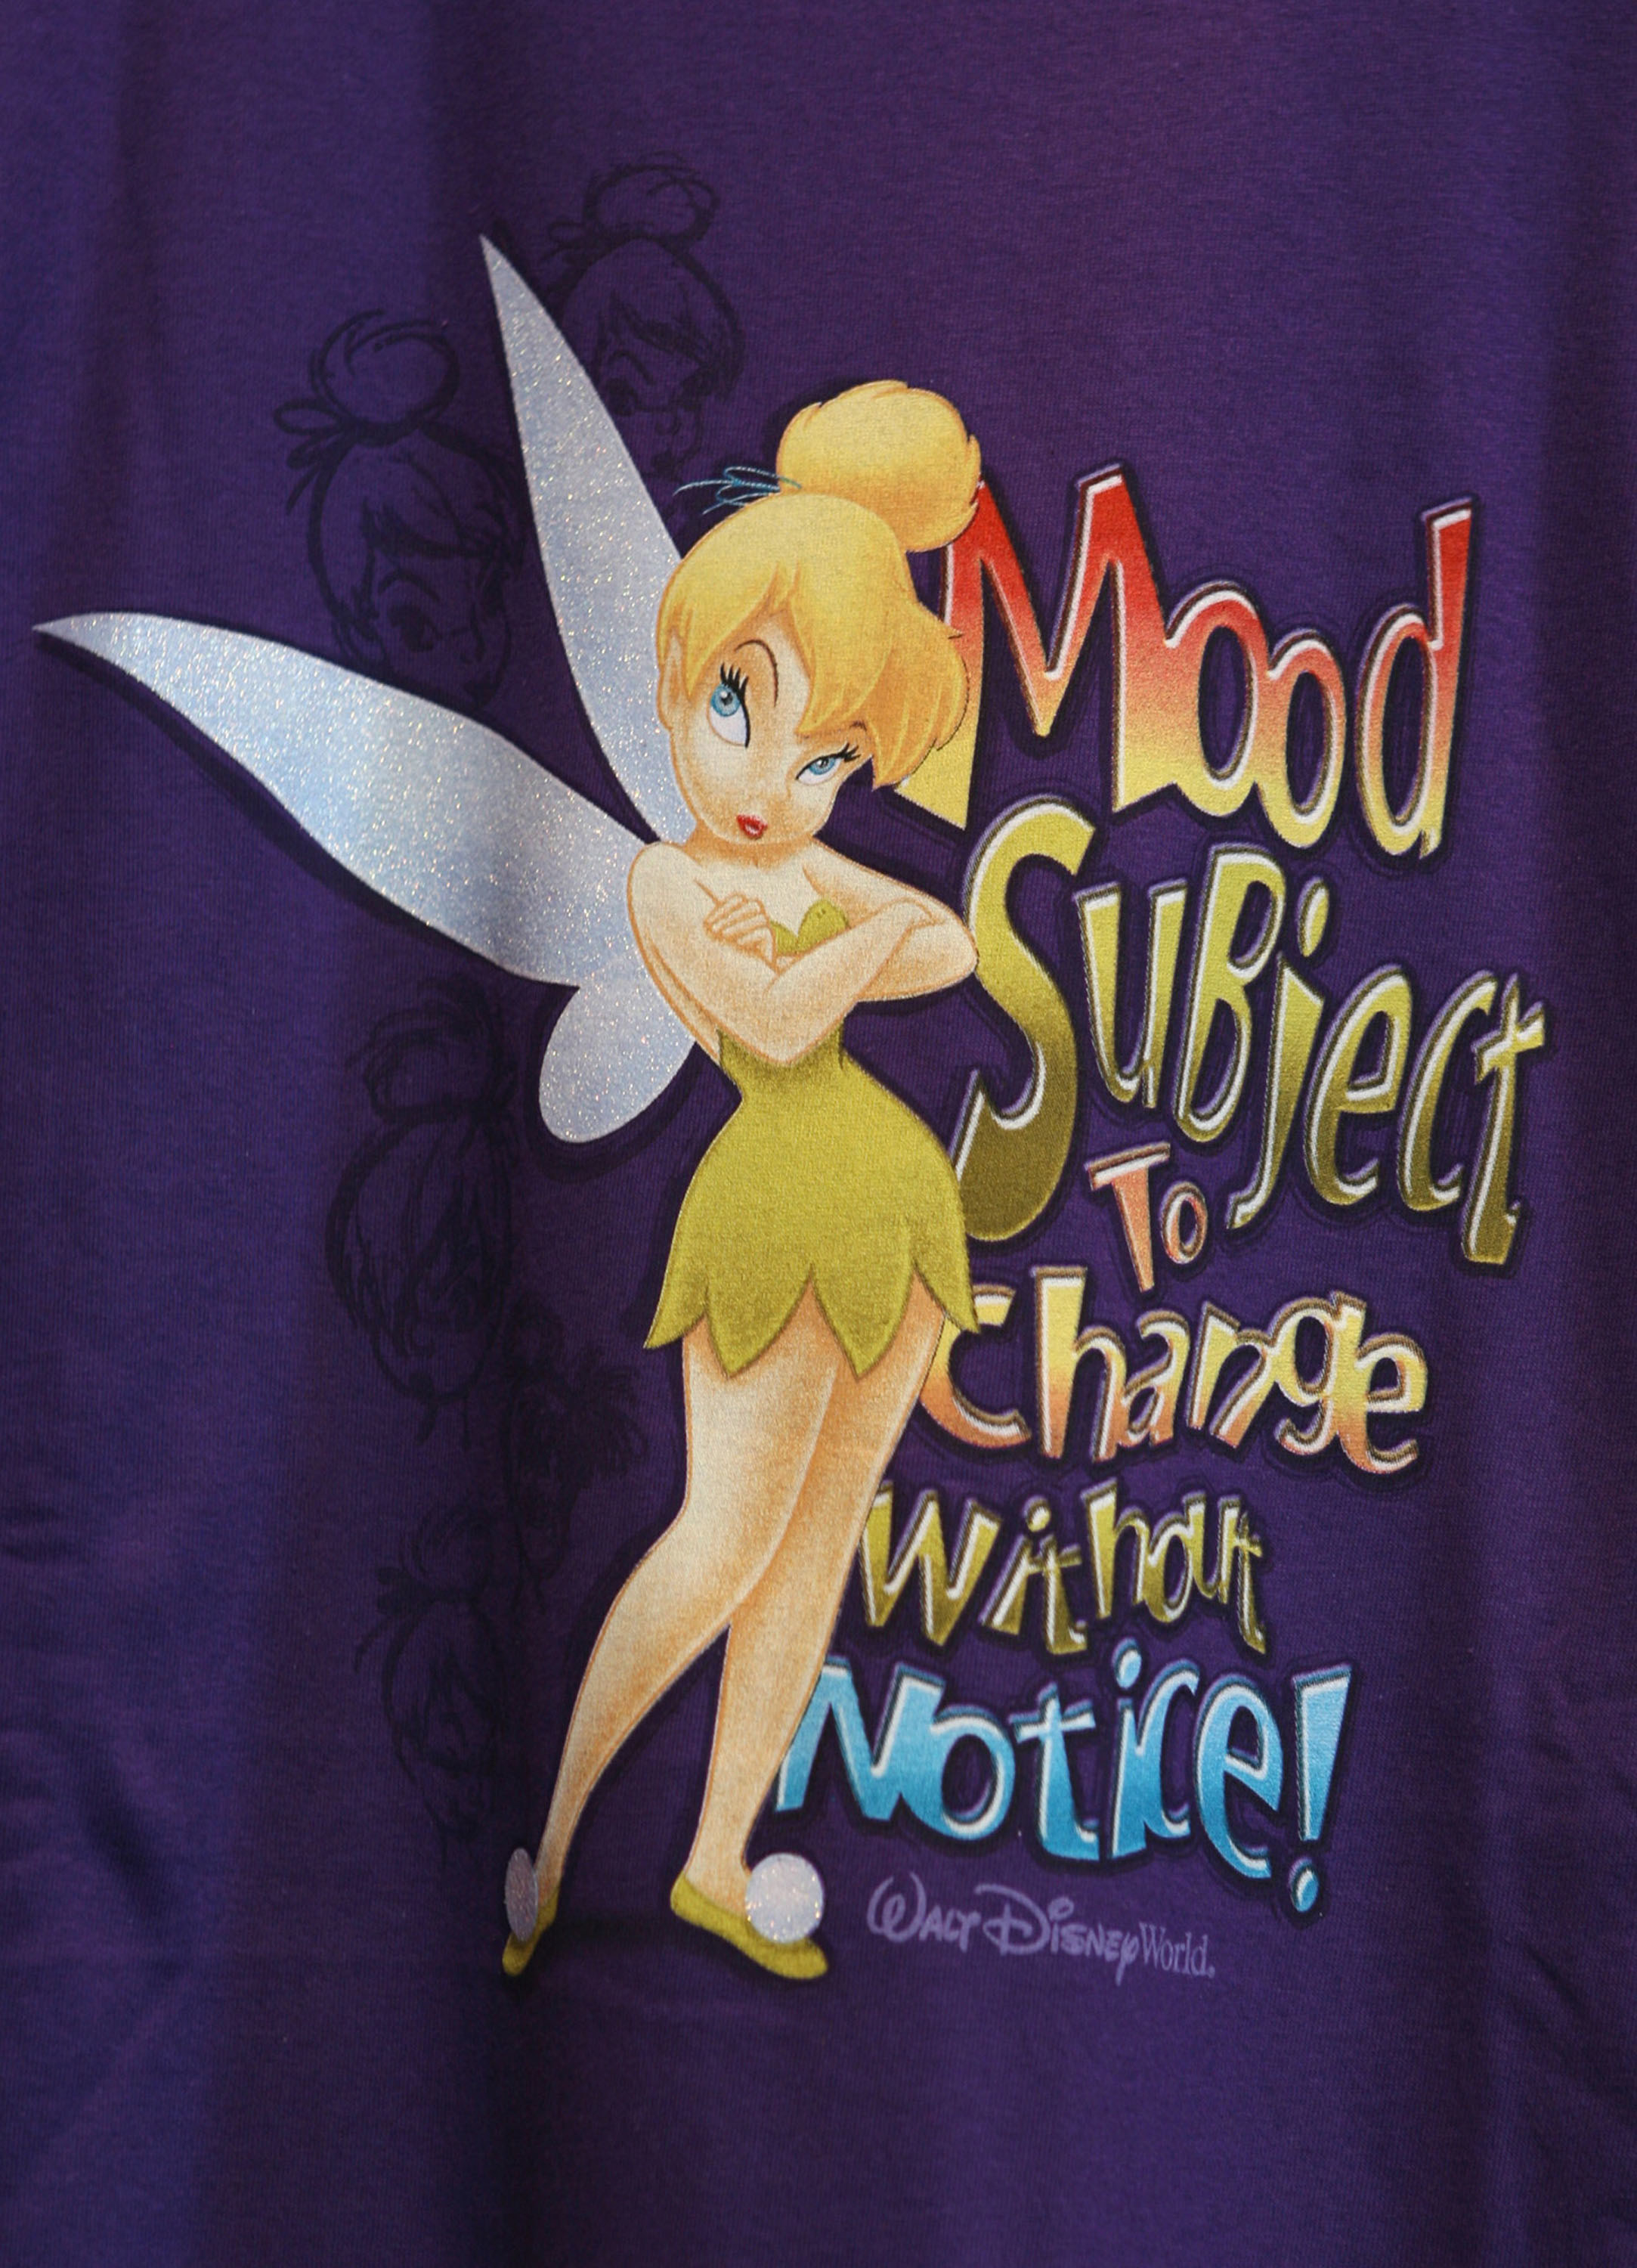 Tinker Bell looking mad with &quot;Mood subject to change without notice!&quot; written next to her